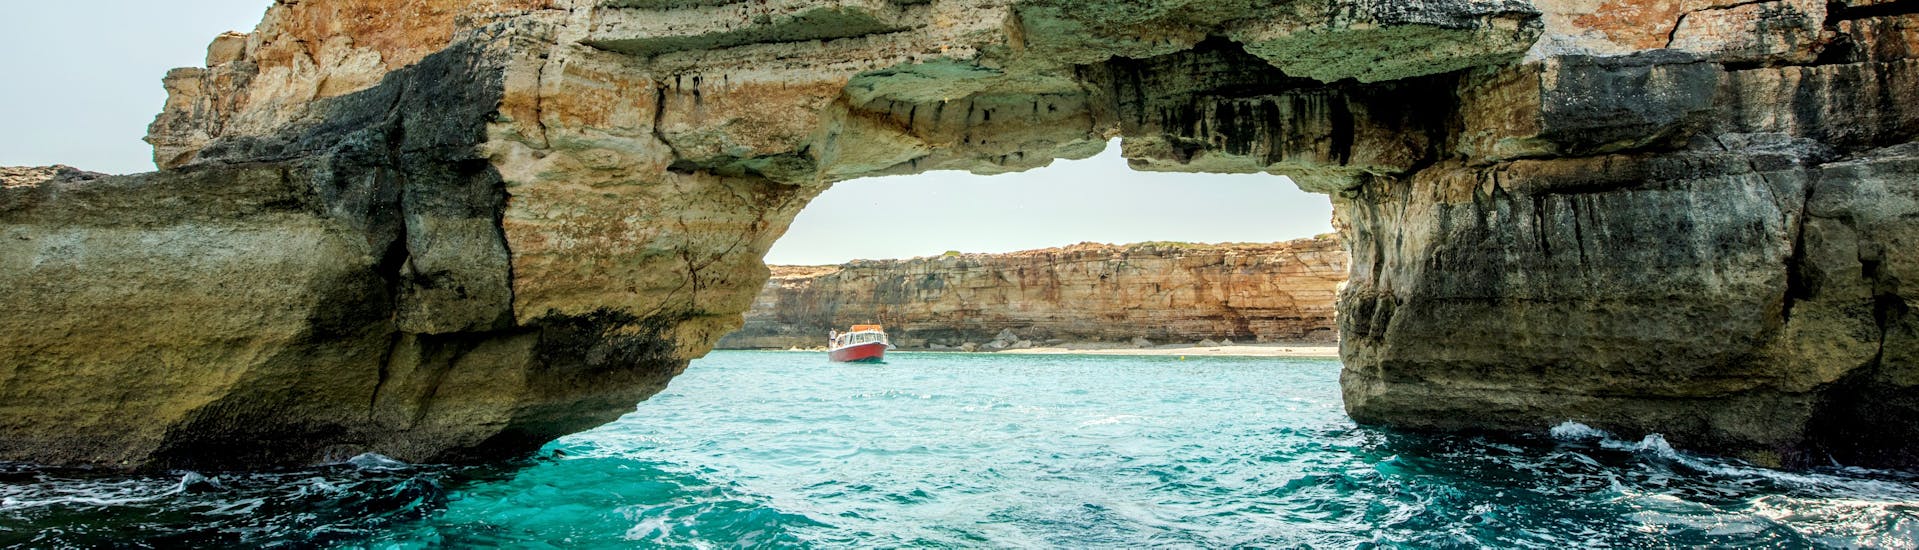 View you will see during the Boat Trip from Rethymno to Pirate Caves in Crete with our partner Dolphin Cruises.